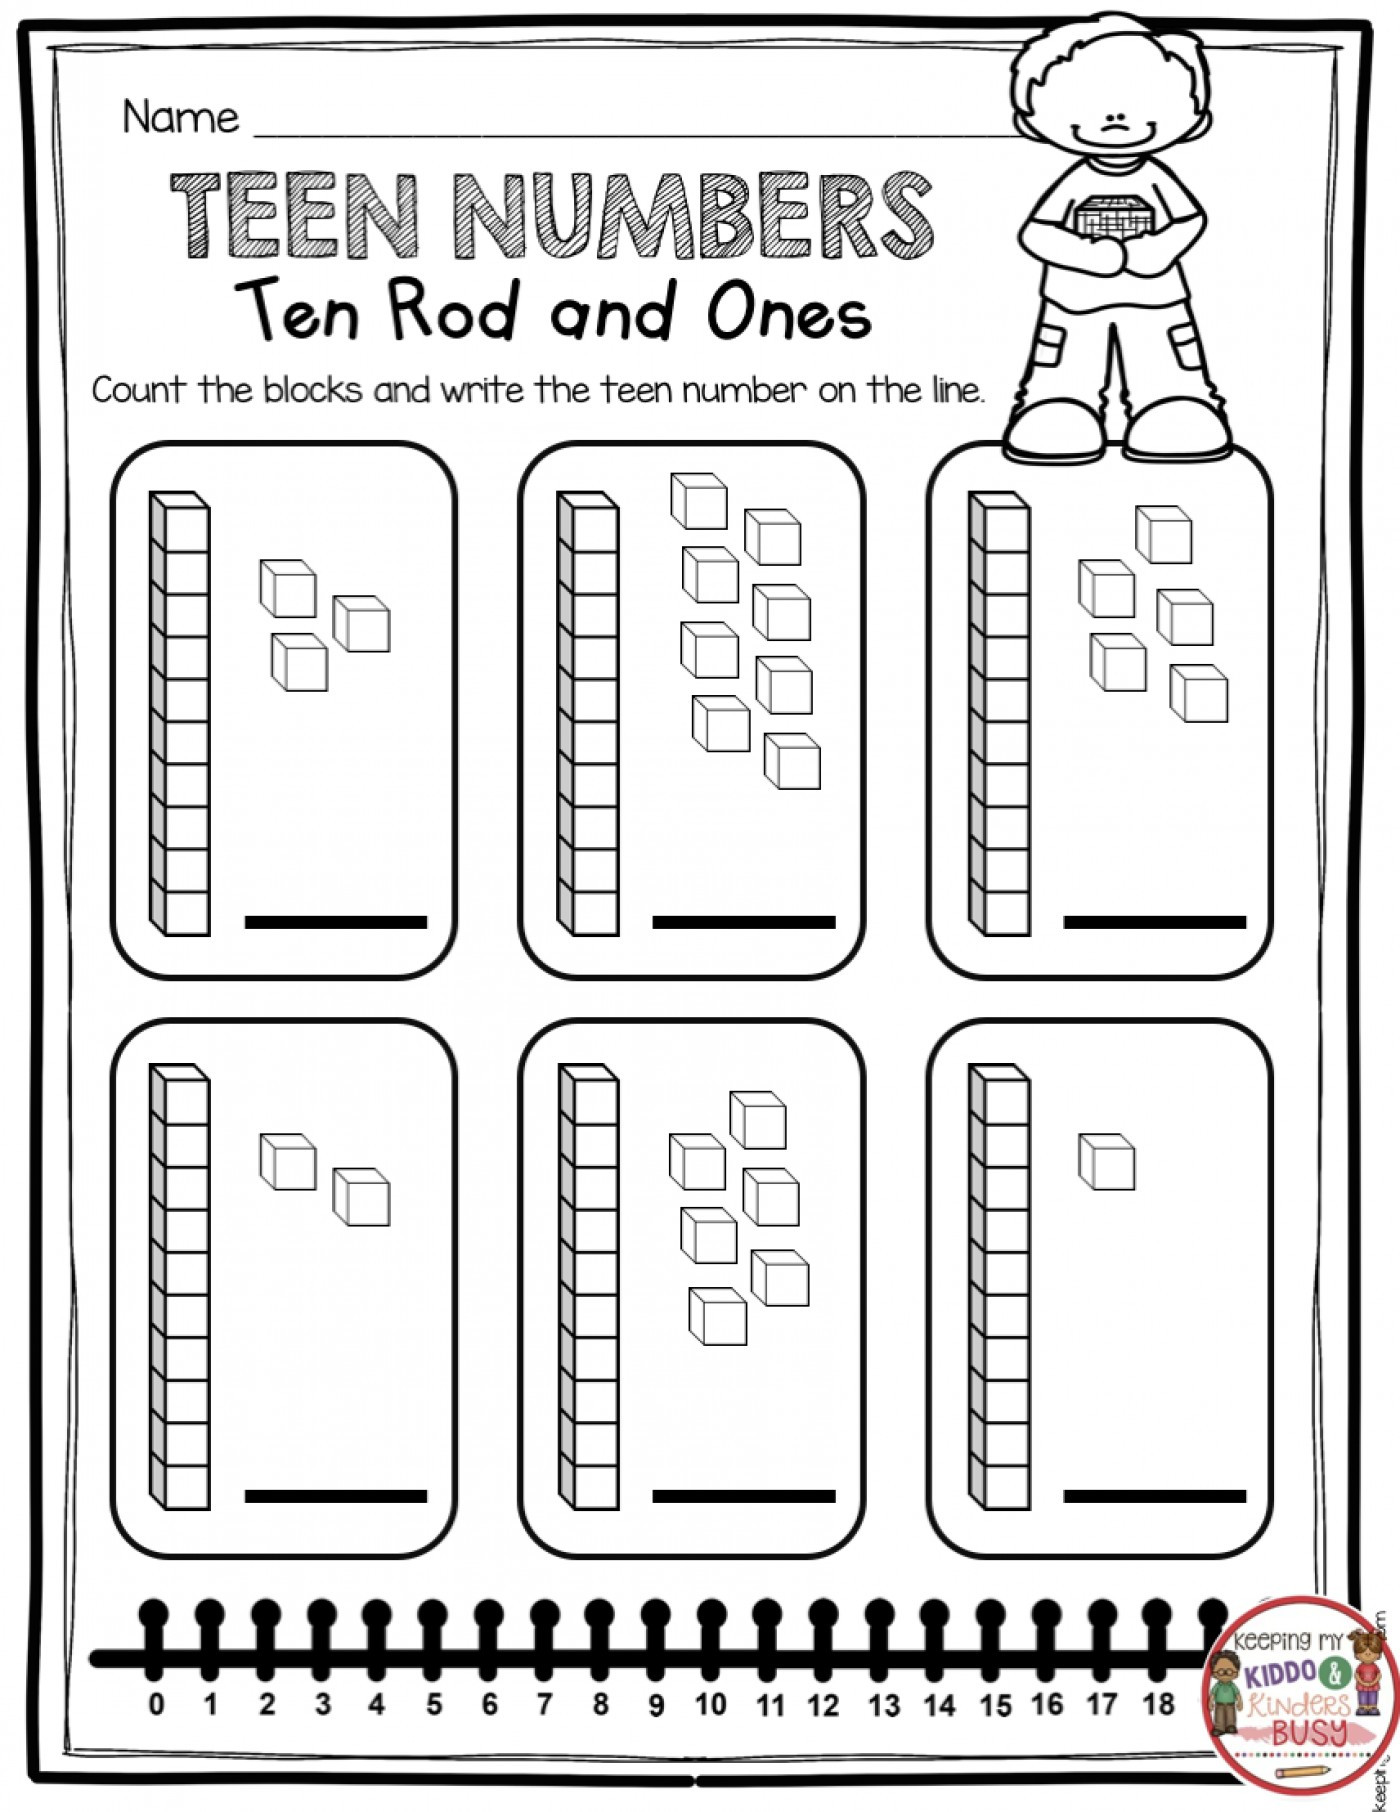 Free Math Worksheets Second Grade 2 Place Value Rounding Round 3 Digit Numbers Nearest 10